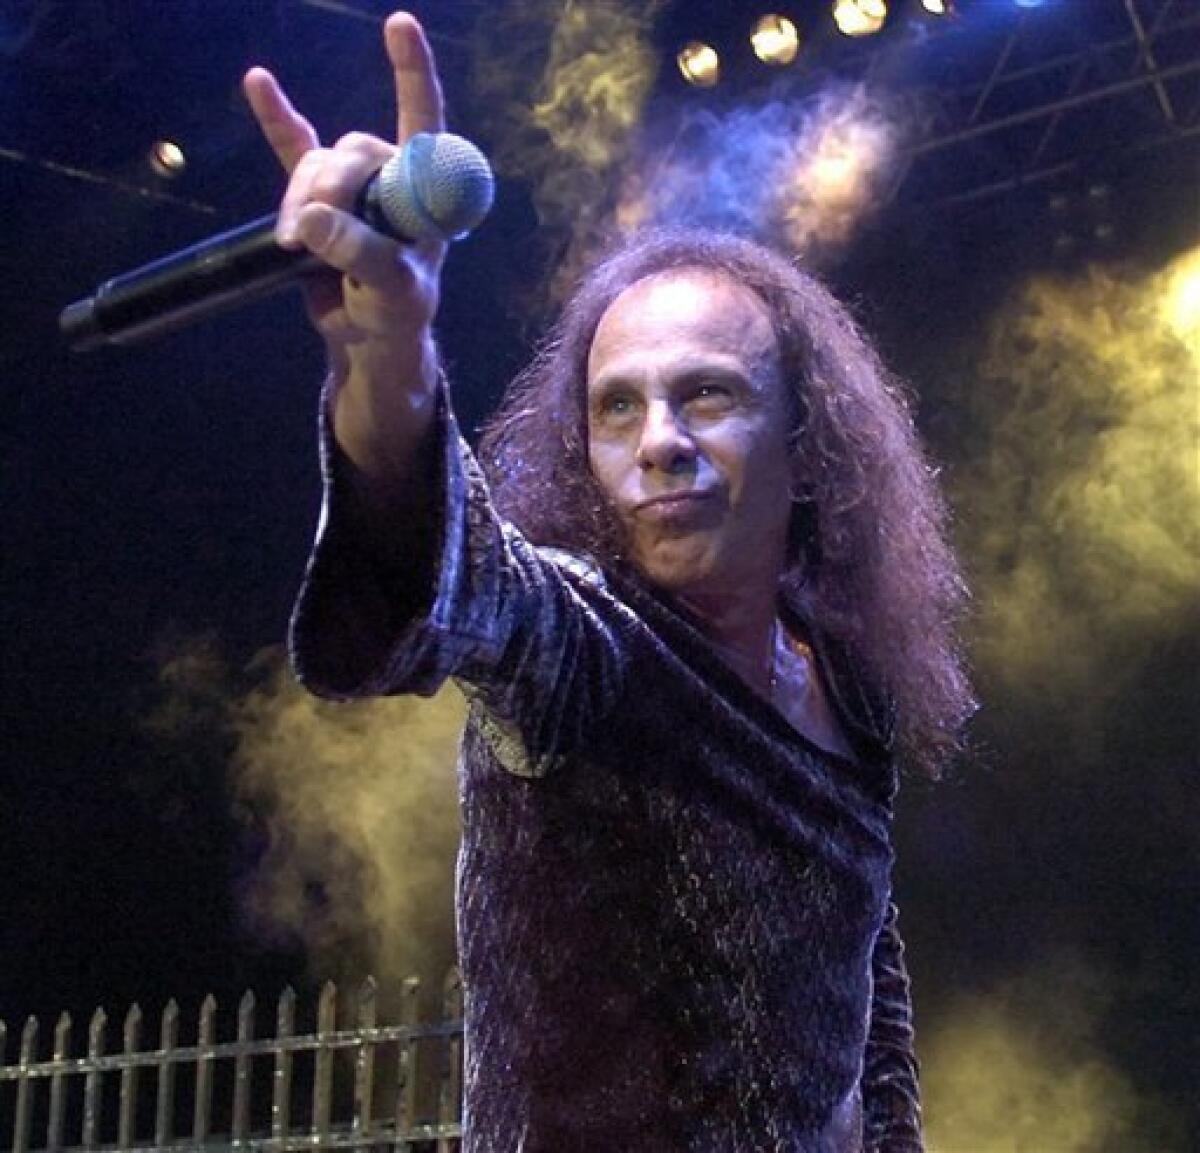 FILE - In this July 7, 2007 file photo, Ronnie James Dio performs with British heavy metal group Heaven and Hell during the 41st annual Montreux Jazz Festival in Switzerland. Dio, who replaced Ozzy Osbourne in Black Sabbath and later led the band Dio, died Sunday, May 16, 2010. He was 67. (AP Photo/Keystone, Sandro Campardo, File)